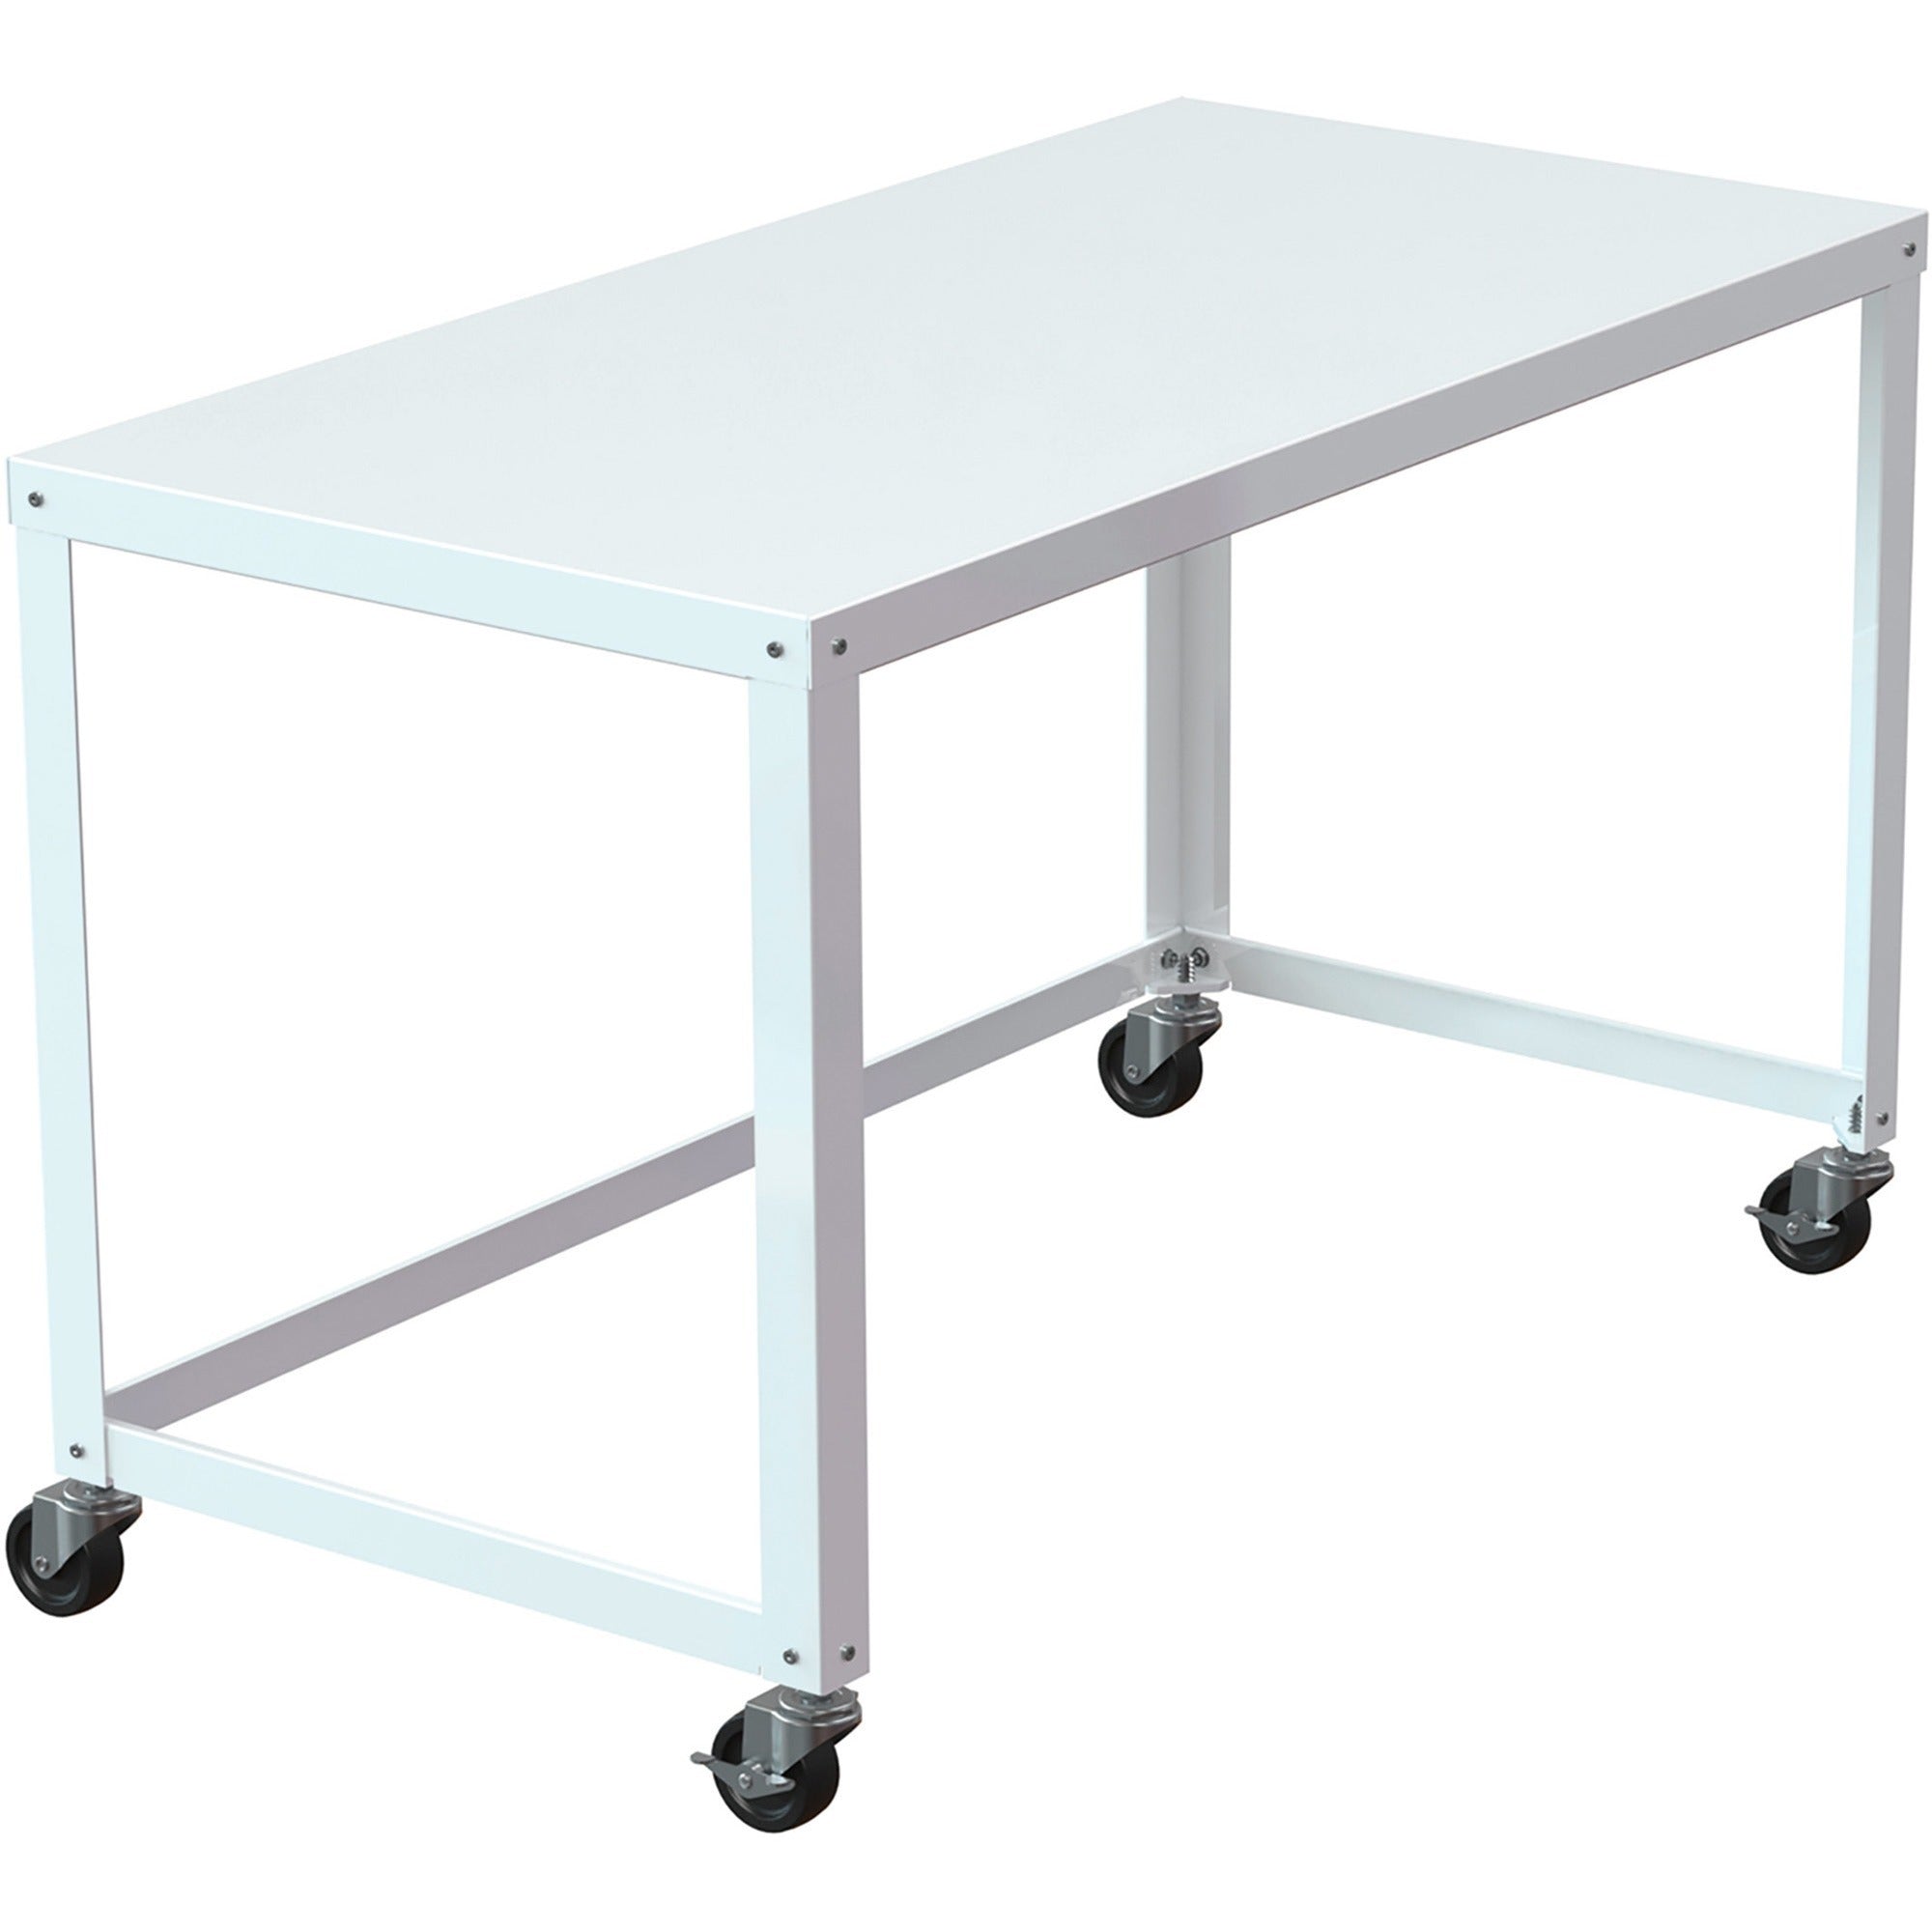 lorell-soho-personal-mobile-desk-for-table-toprectangle-top-x-48-table-top-width-x-23-table-top-depth-2950-height-assembly-required-white-1-each_llr34418 - 1